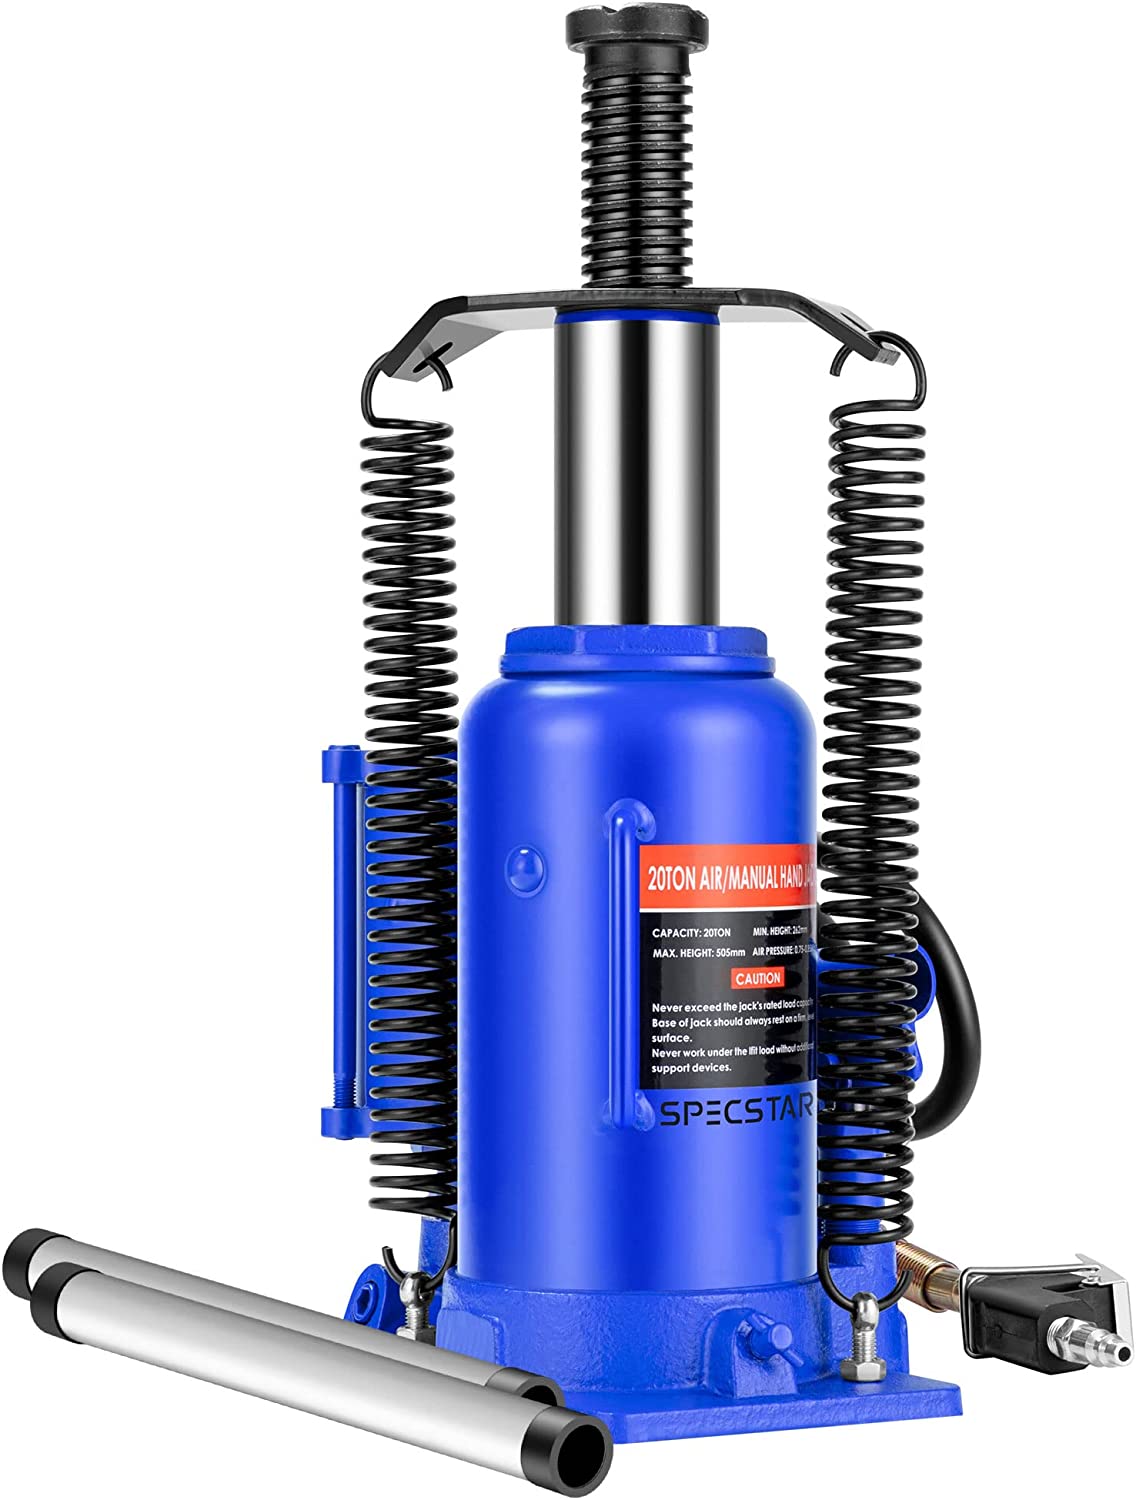 SPECSTAR Air Hydraulic Bottle Jack 20 Ton with Manual Pump